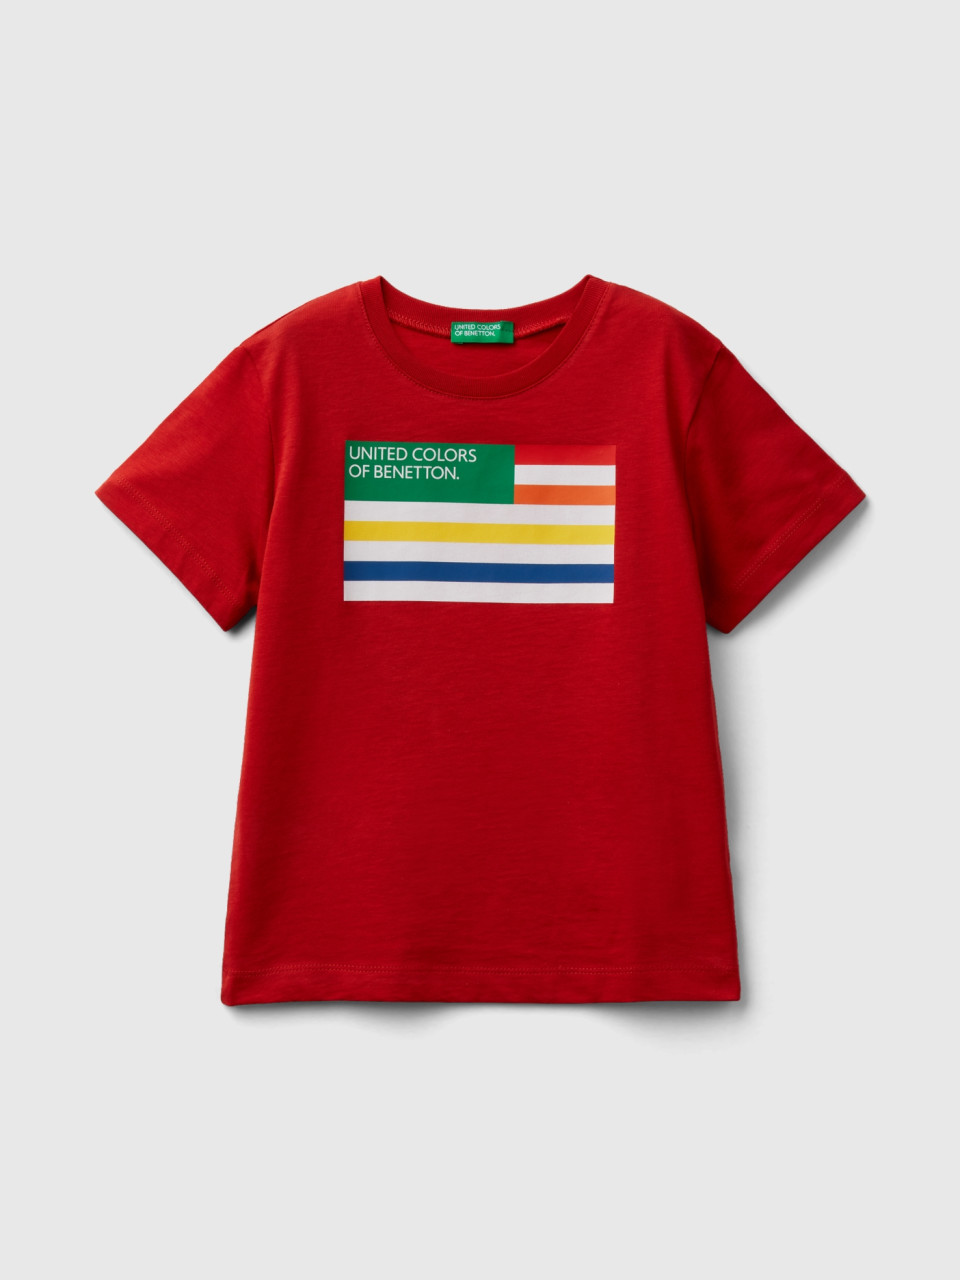 Benetton, T-shirt With Print In 100% Organic Cotton, Brick Red, Kids